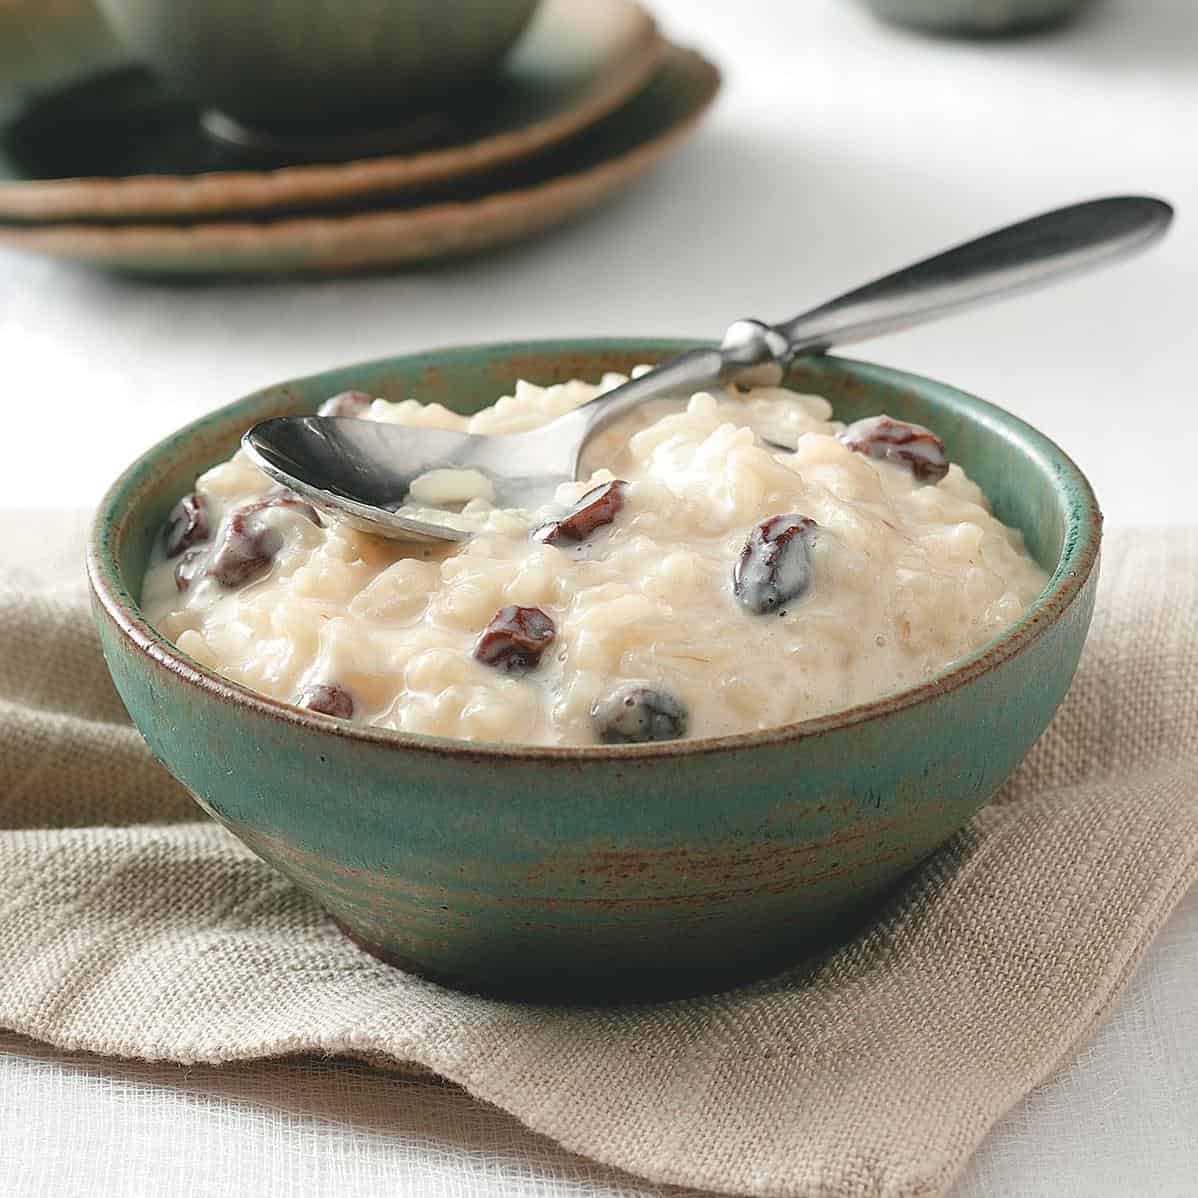  Creamy, sweet and oh-so-comforting, this arroz con leche will transport you straight to grandma's kitchen.